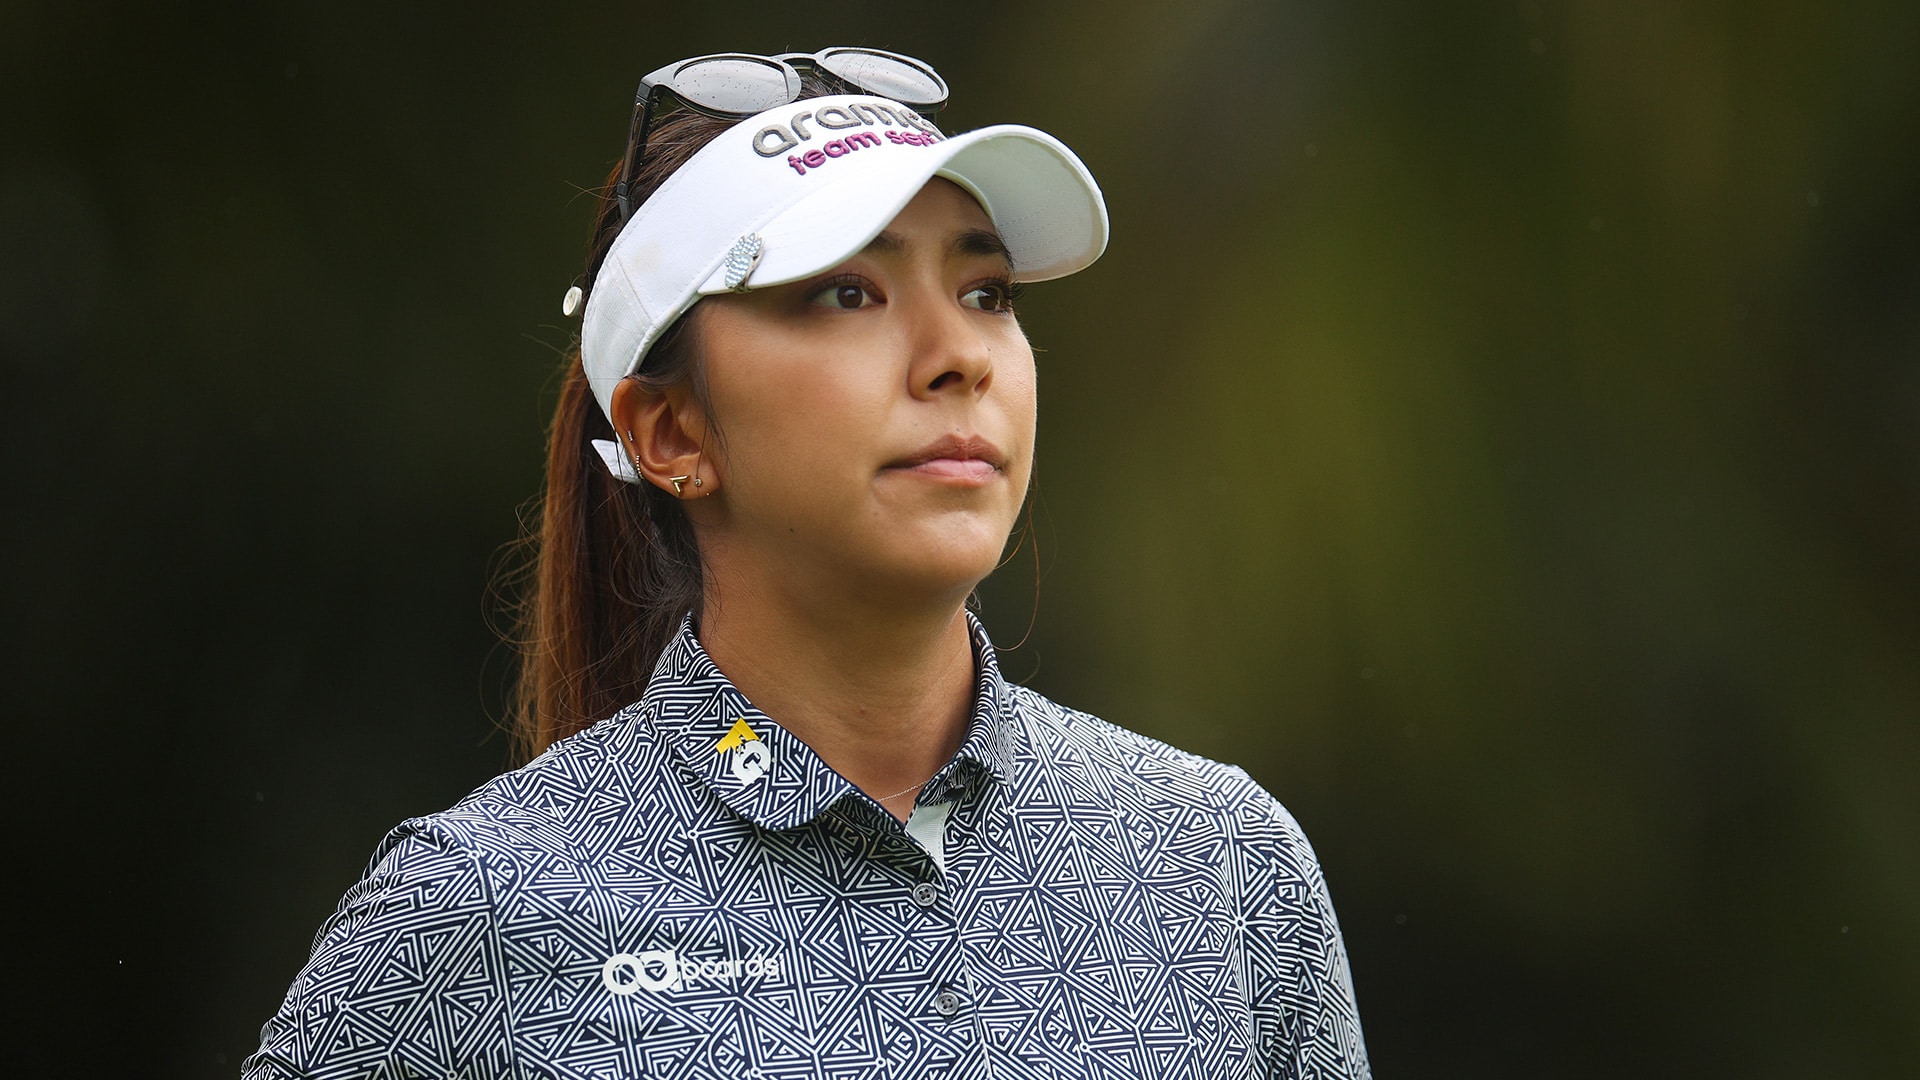 Alison Lee, Gaby Lopez, Jenny Shin share lead early at Drive on LPGA Championship